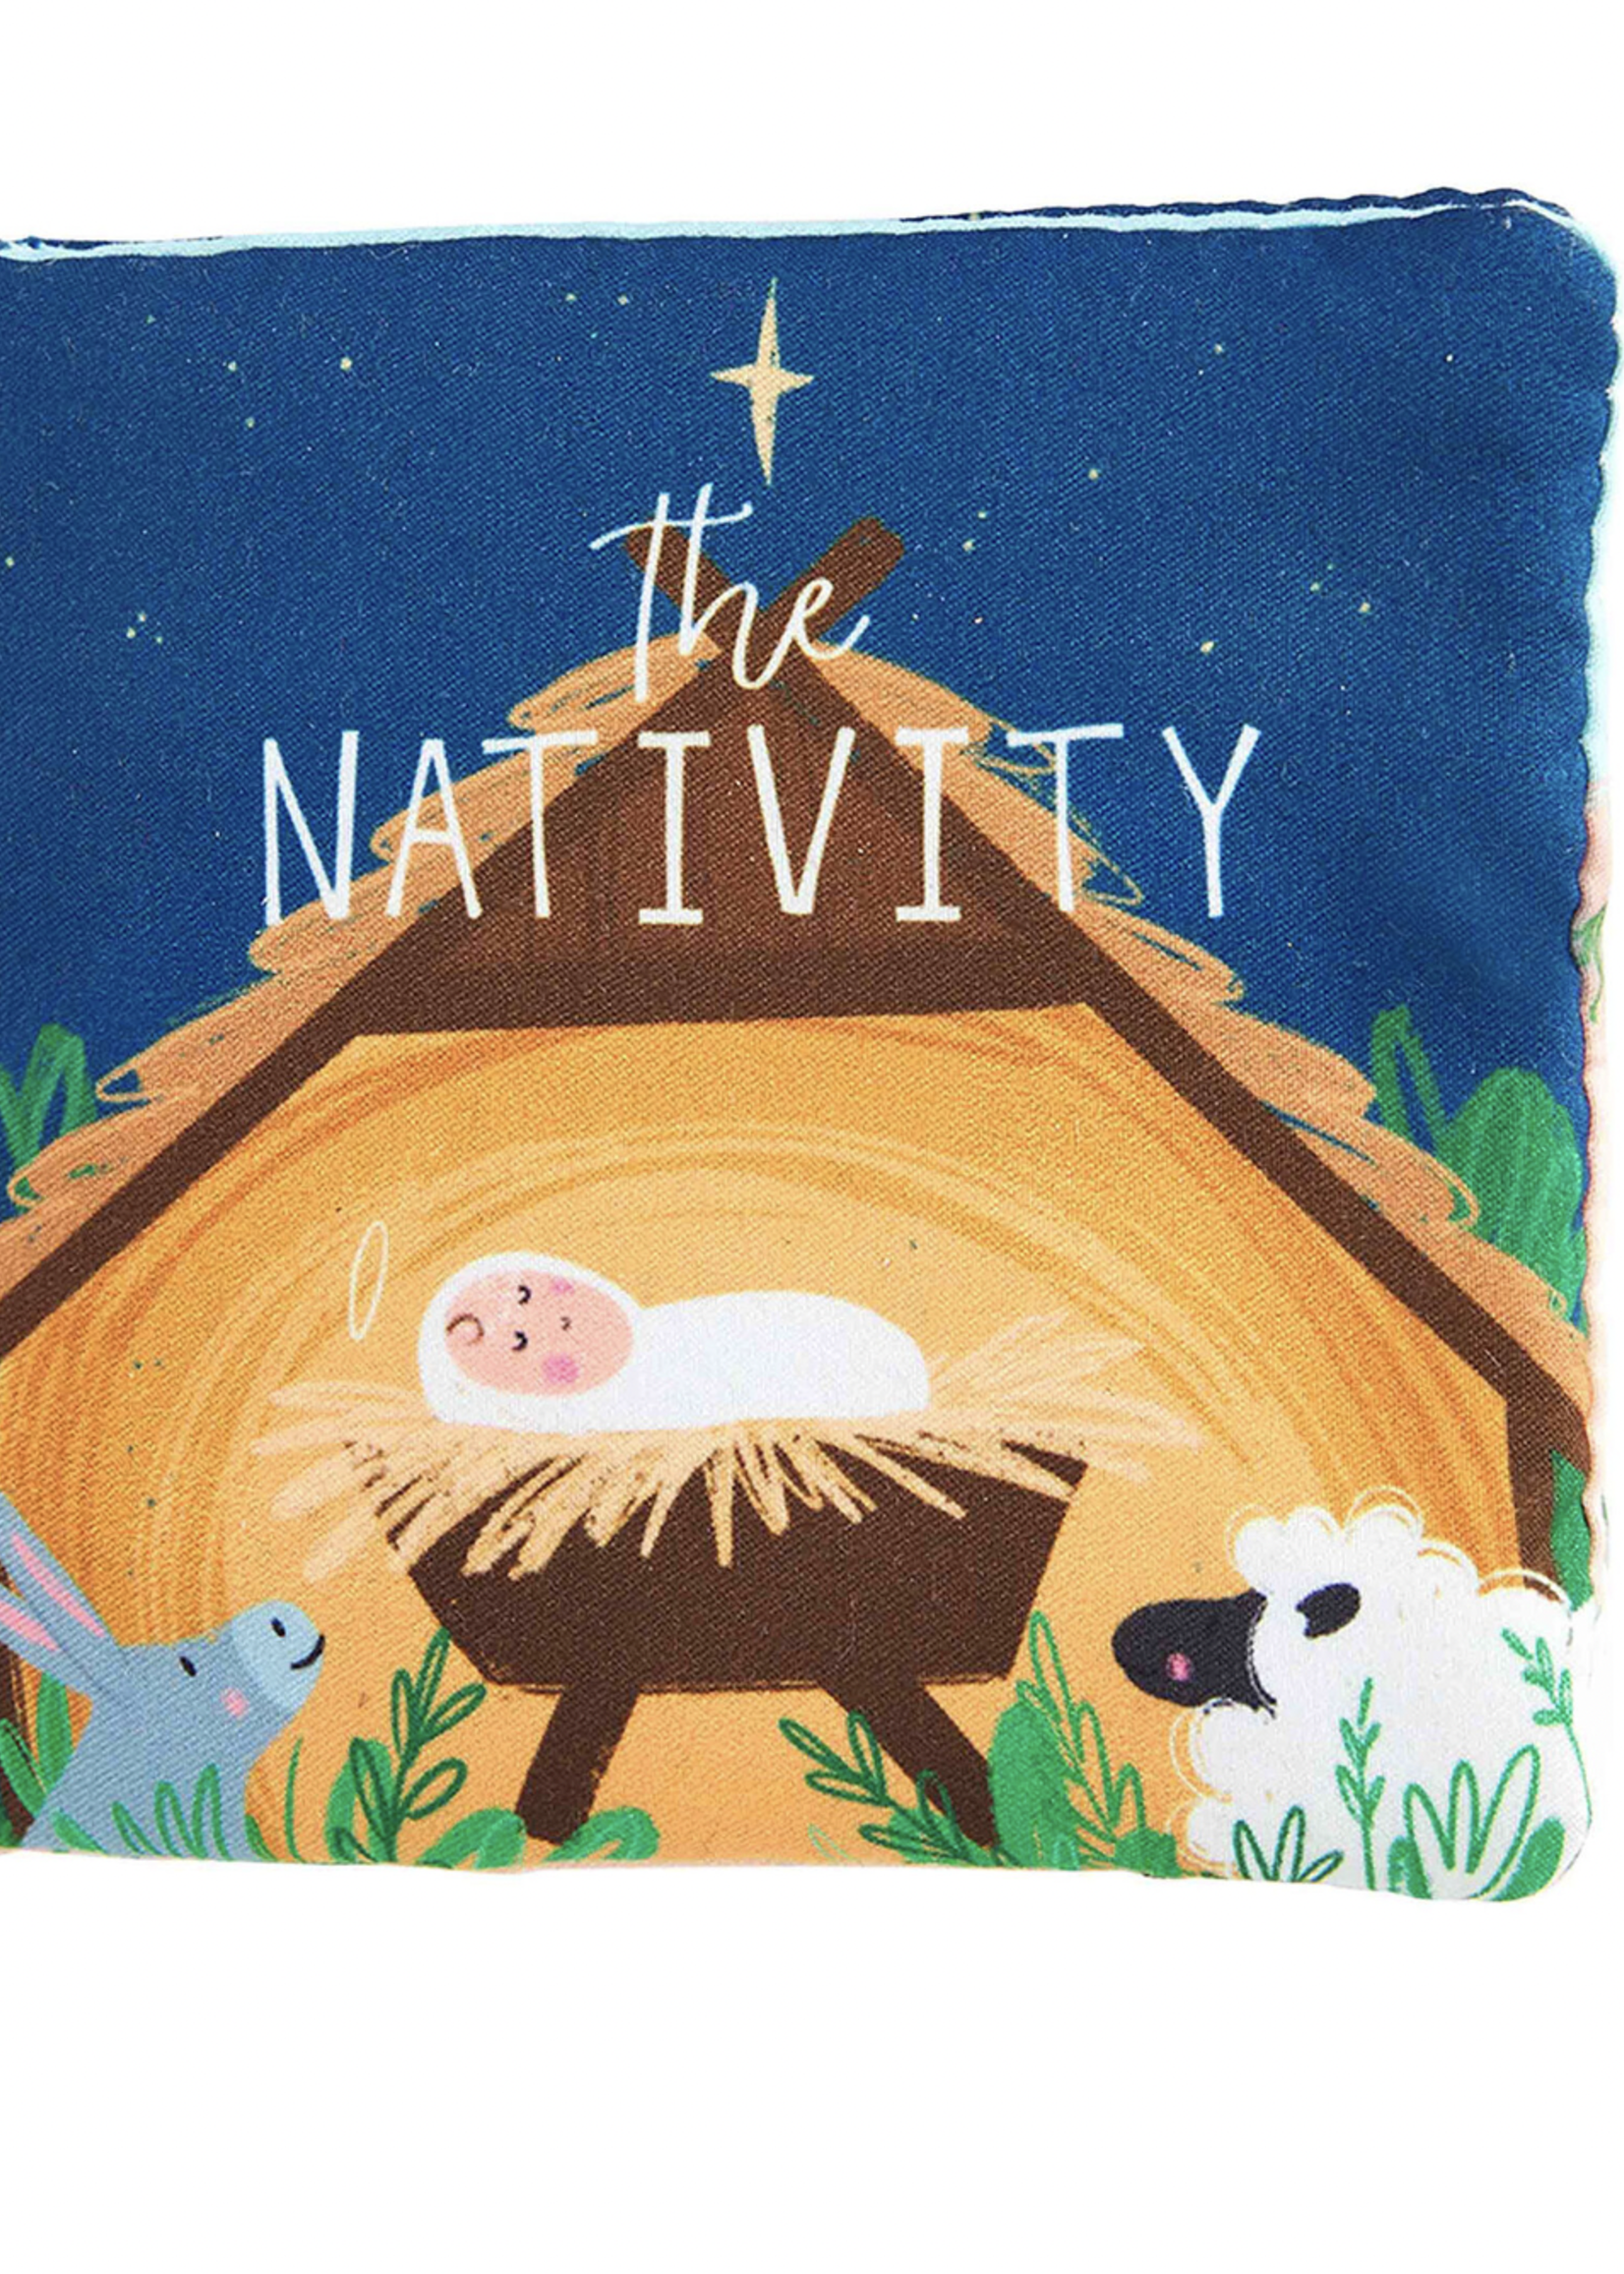 Elitaire Petite Nativity Plush Toy with Book